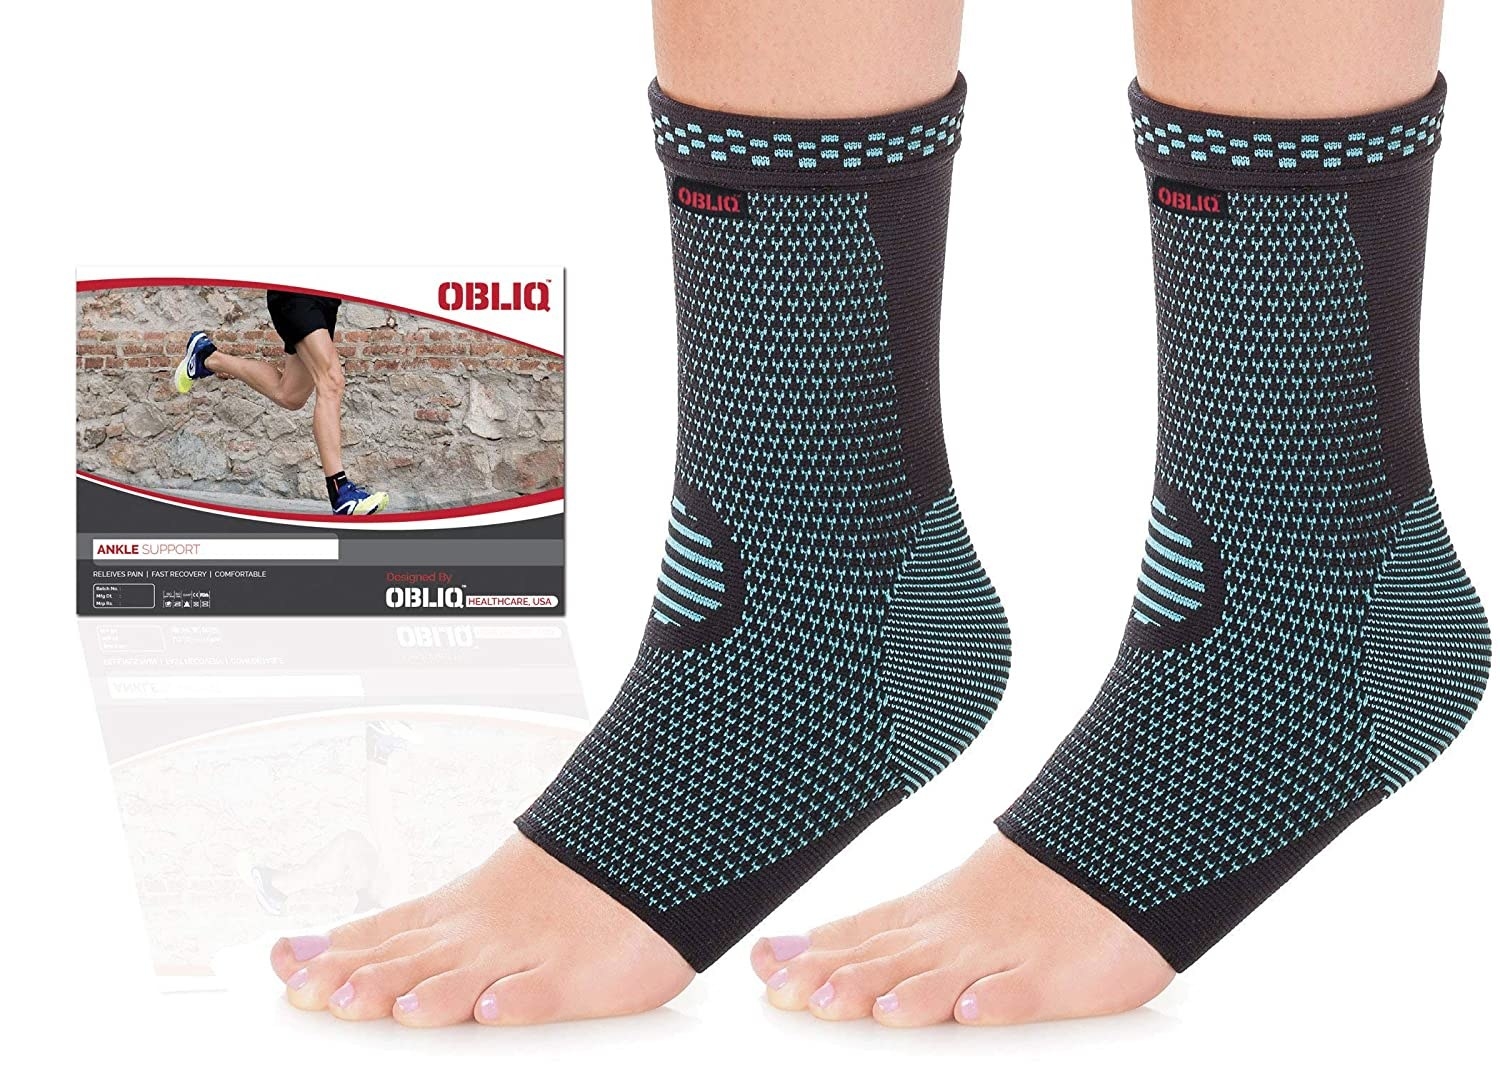 Blue compression foot sleeves on some legs and an inset image of a person running.